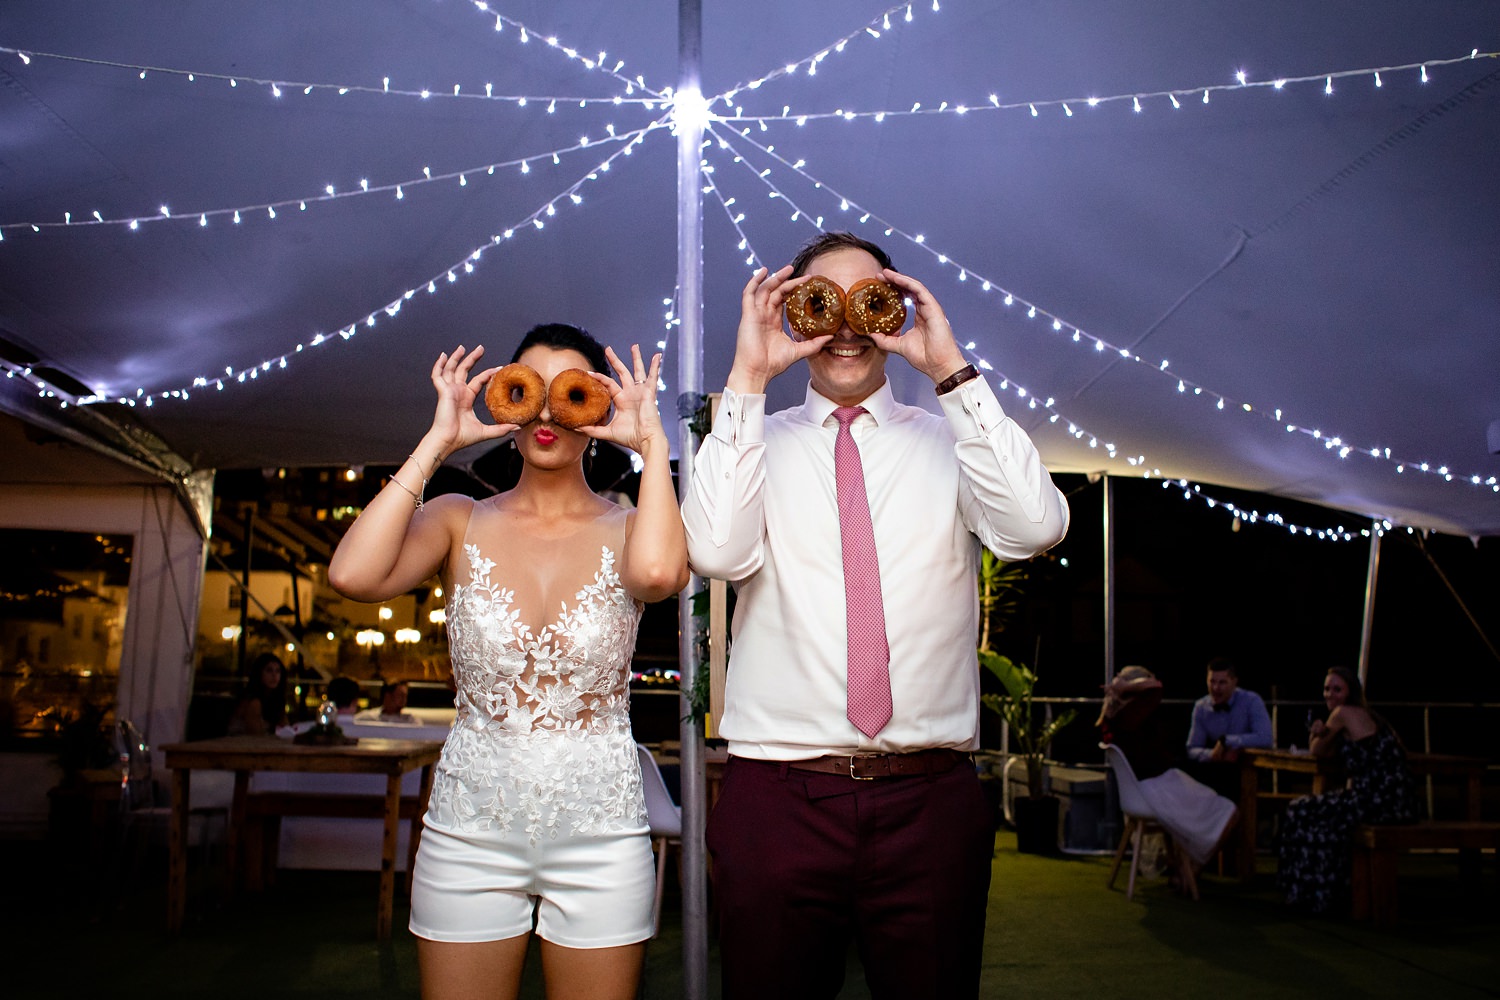 The bride and groom pose at their doughnut dessert bar with doughnuts over their eyes and fairy lights above their heads